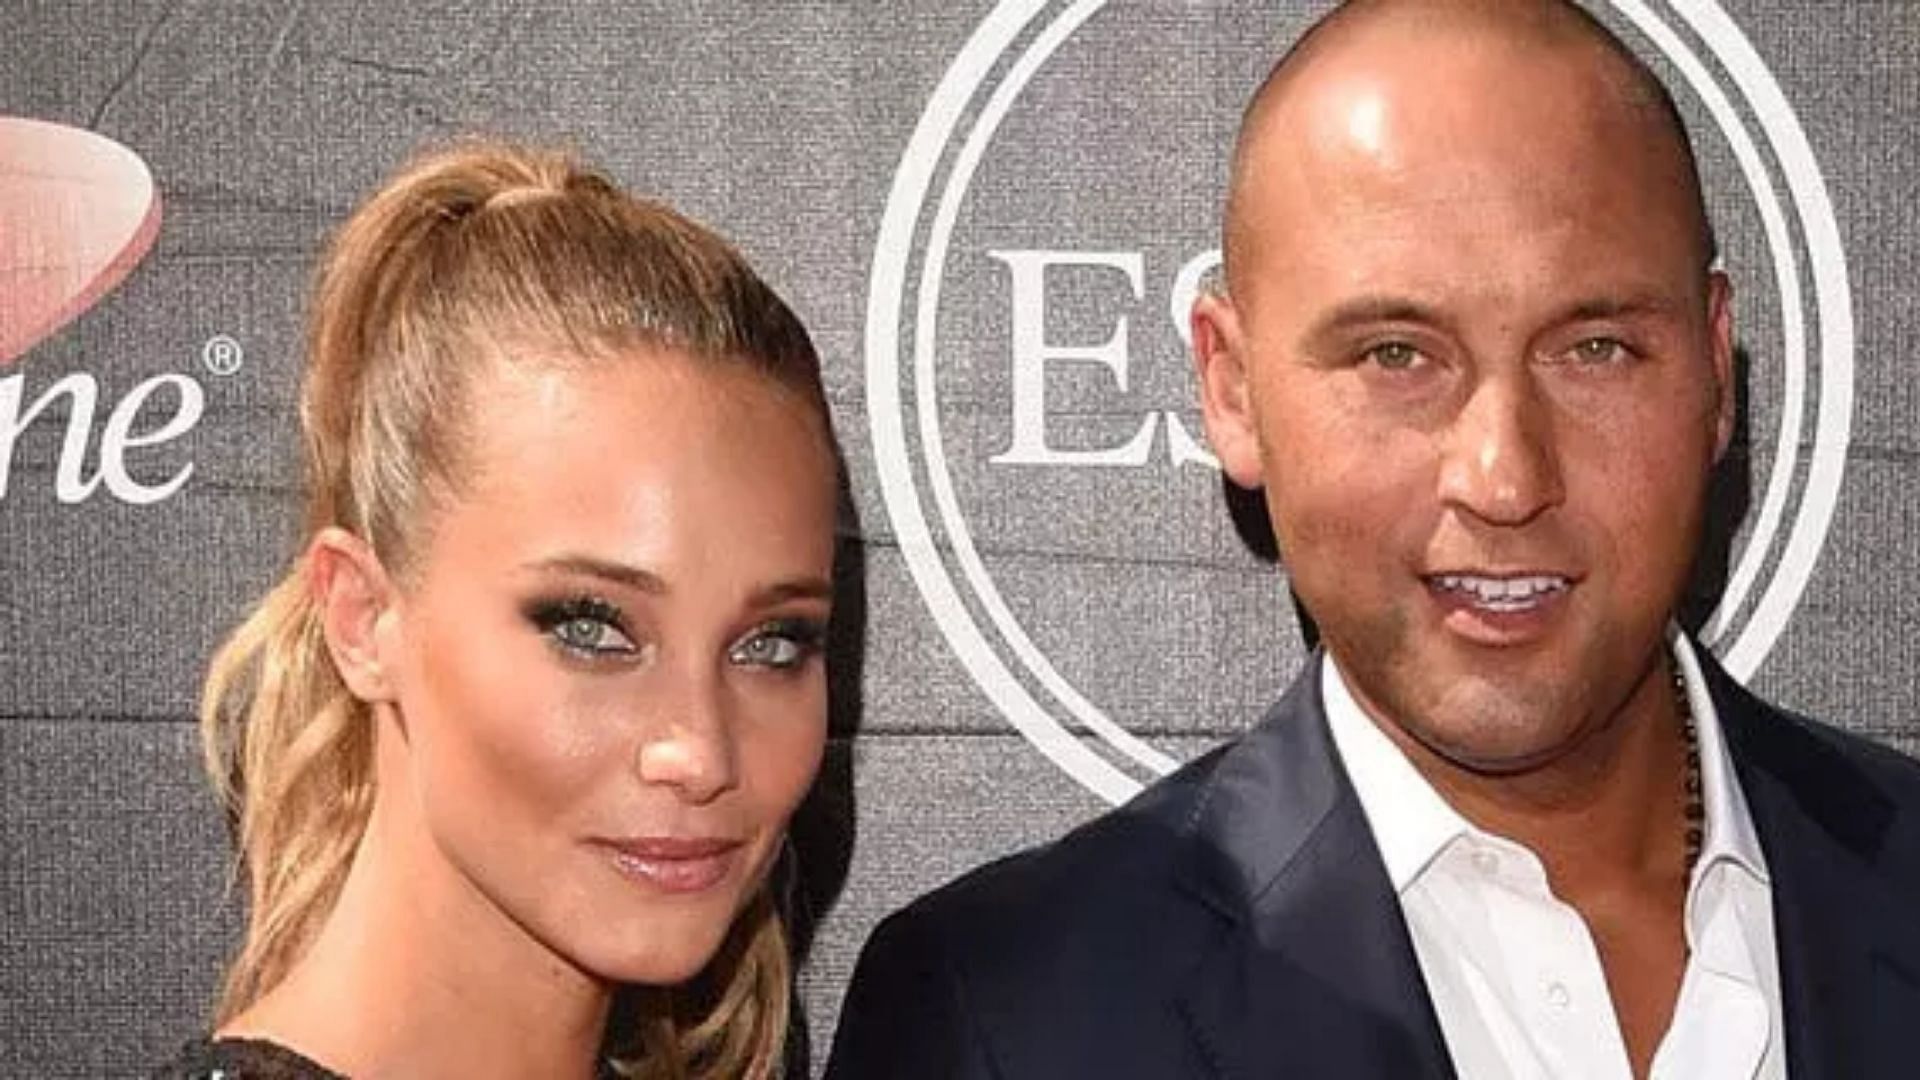 New York Yankees legend Derek Jeter and his wife, Hannah, welcome